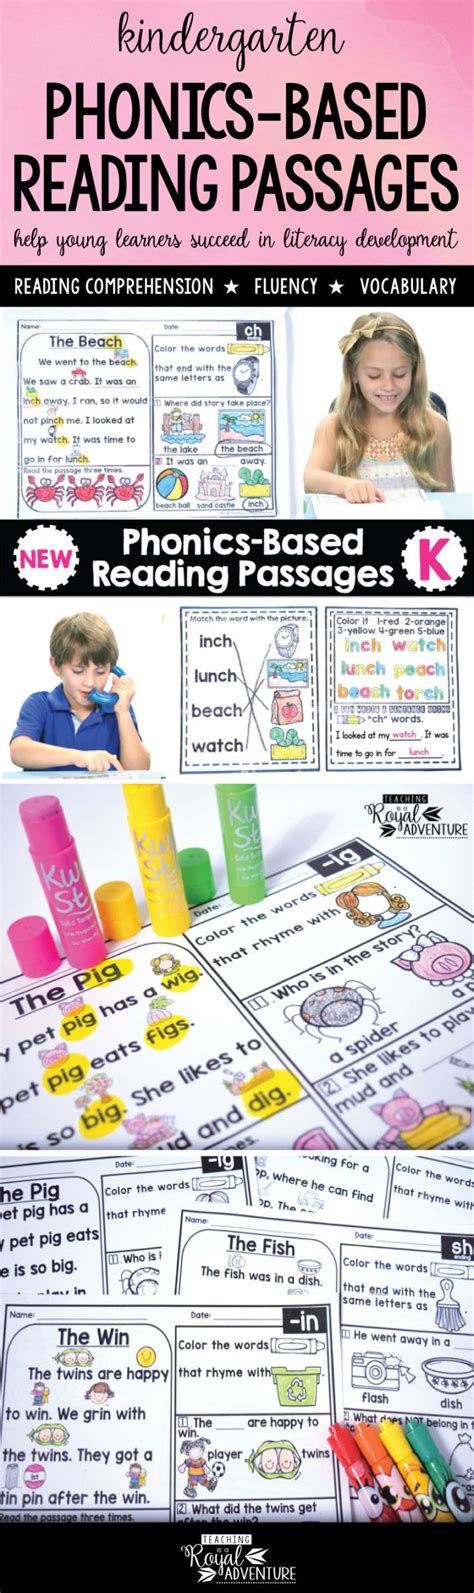 By the time, the children reach the end, they will begin to understand a pattern and will be reading much quicker because of repetition. Fluency and Skill Based Reading Comprehension Passages ...